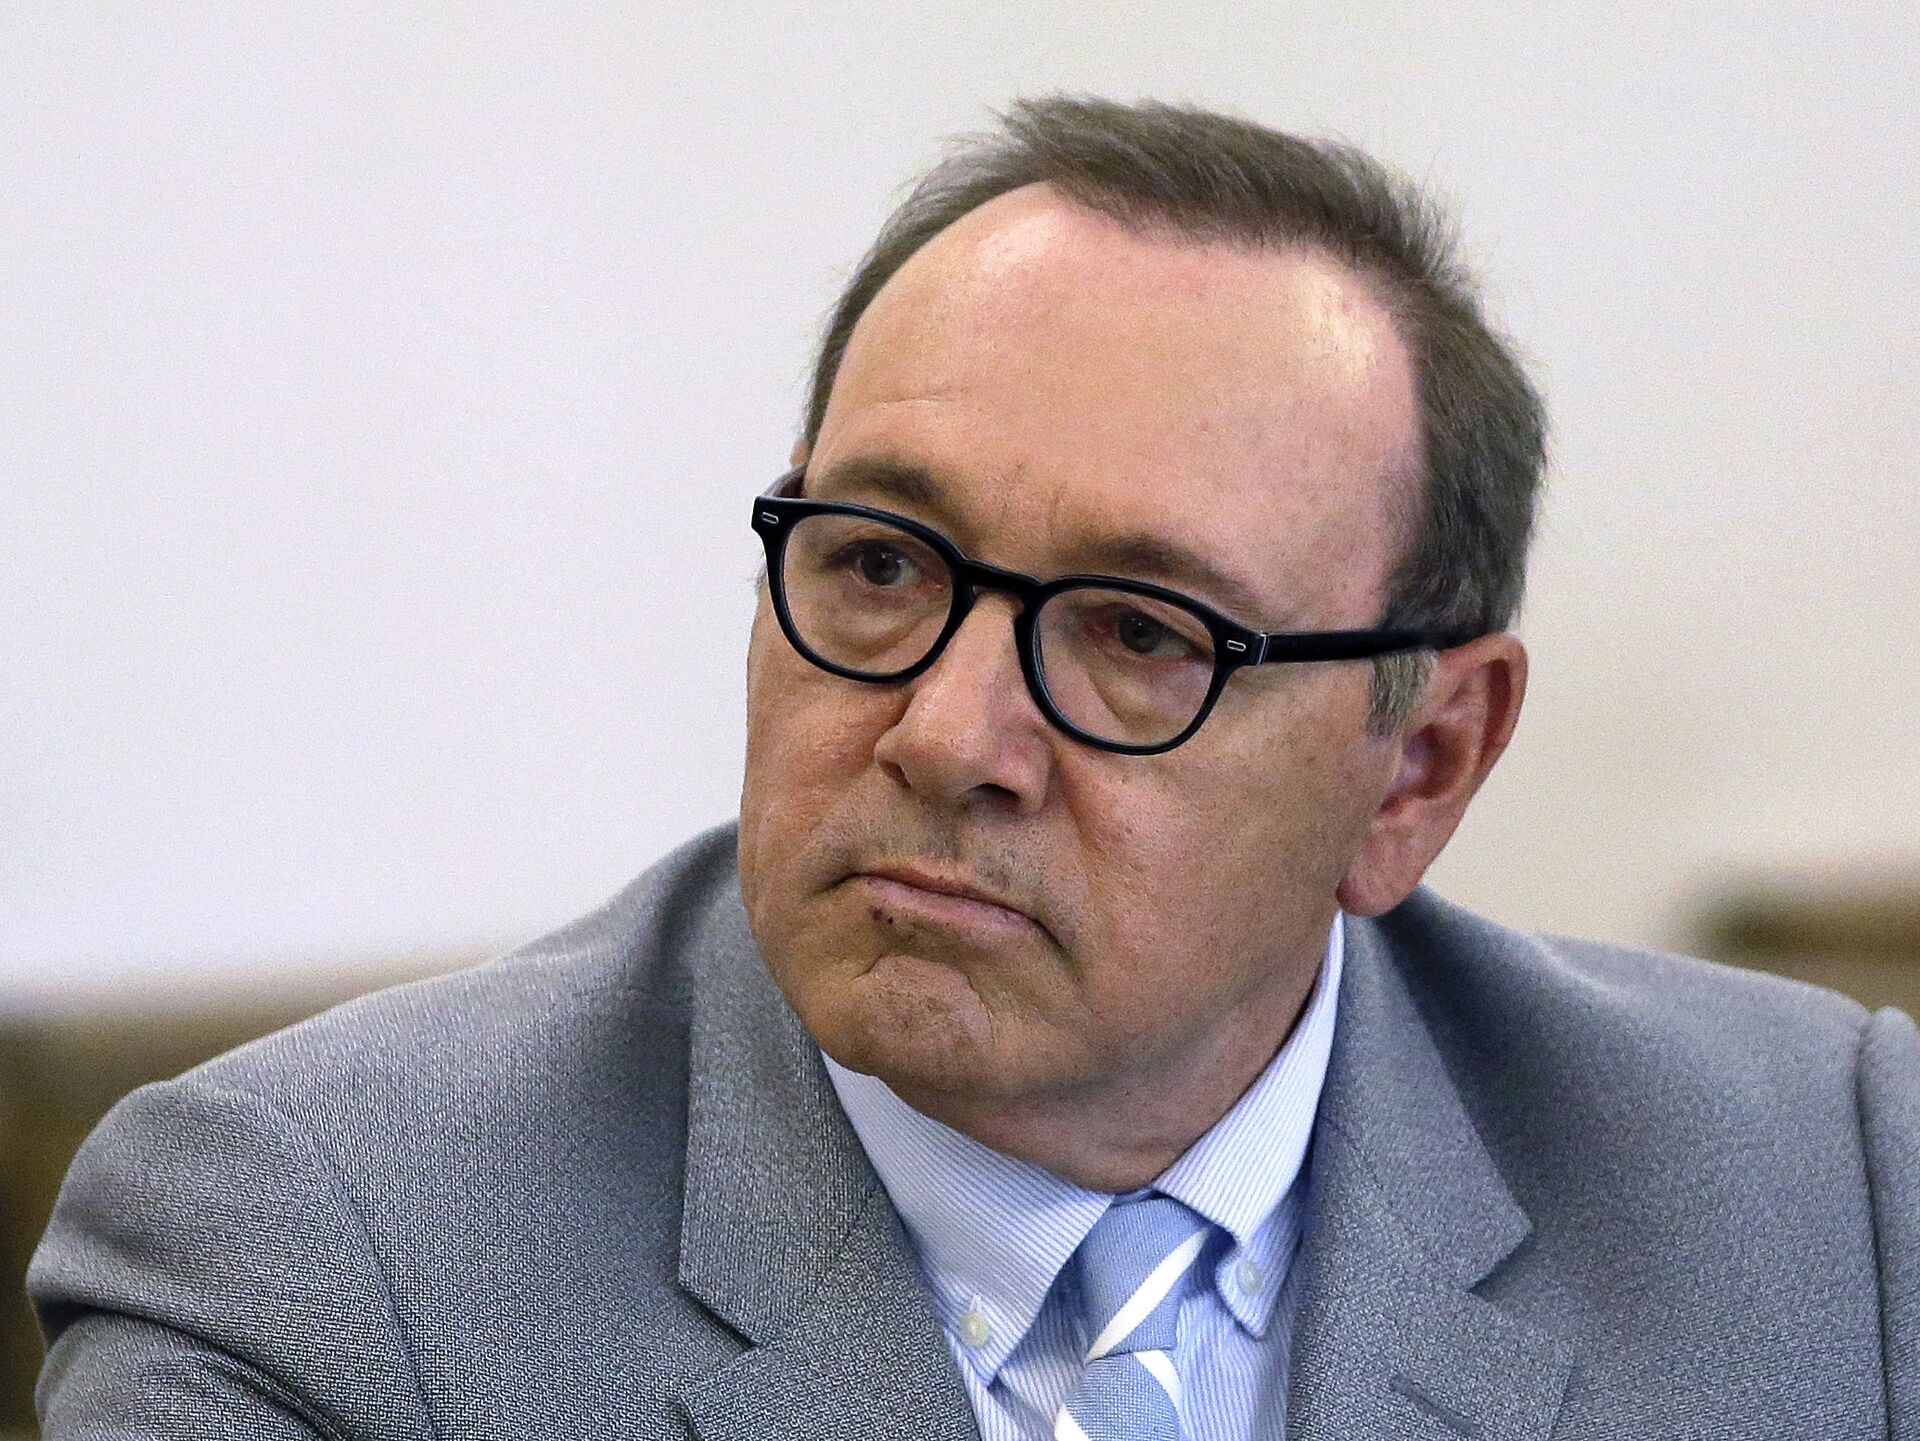 Actor Kevin Spacey attends a pretrial hearing on Monday, June 3, 2019, at district court in Nantucket, Mass. - Sputnik International, 1920, 28.09.2021